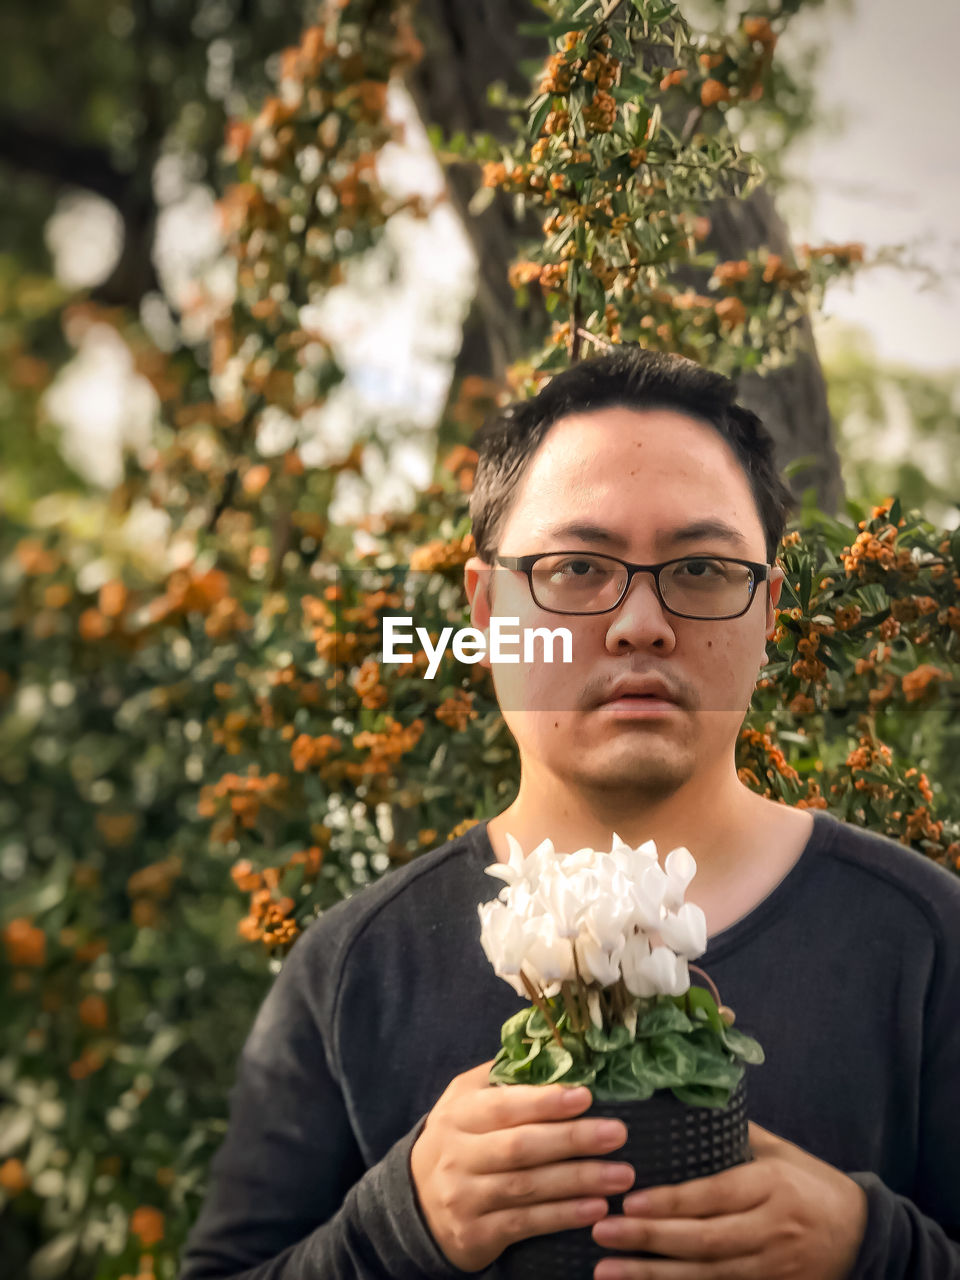 Portrait of young man holding potted white flowering cyclamen plant against orange rowanberry, tree